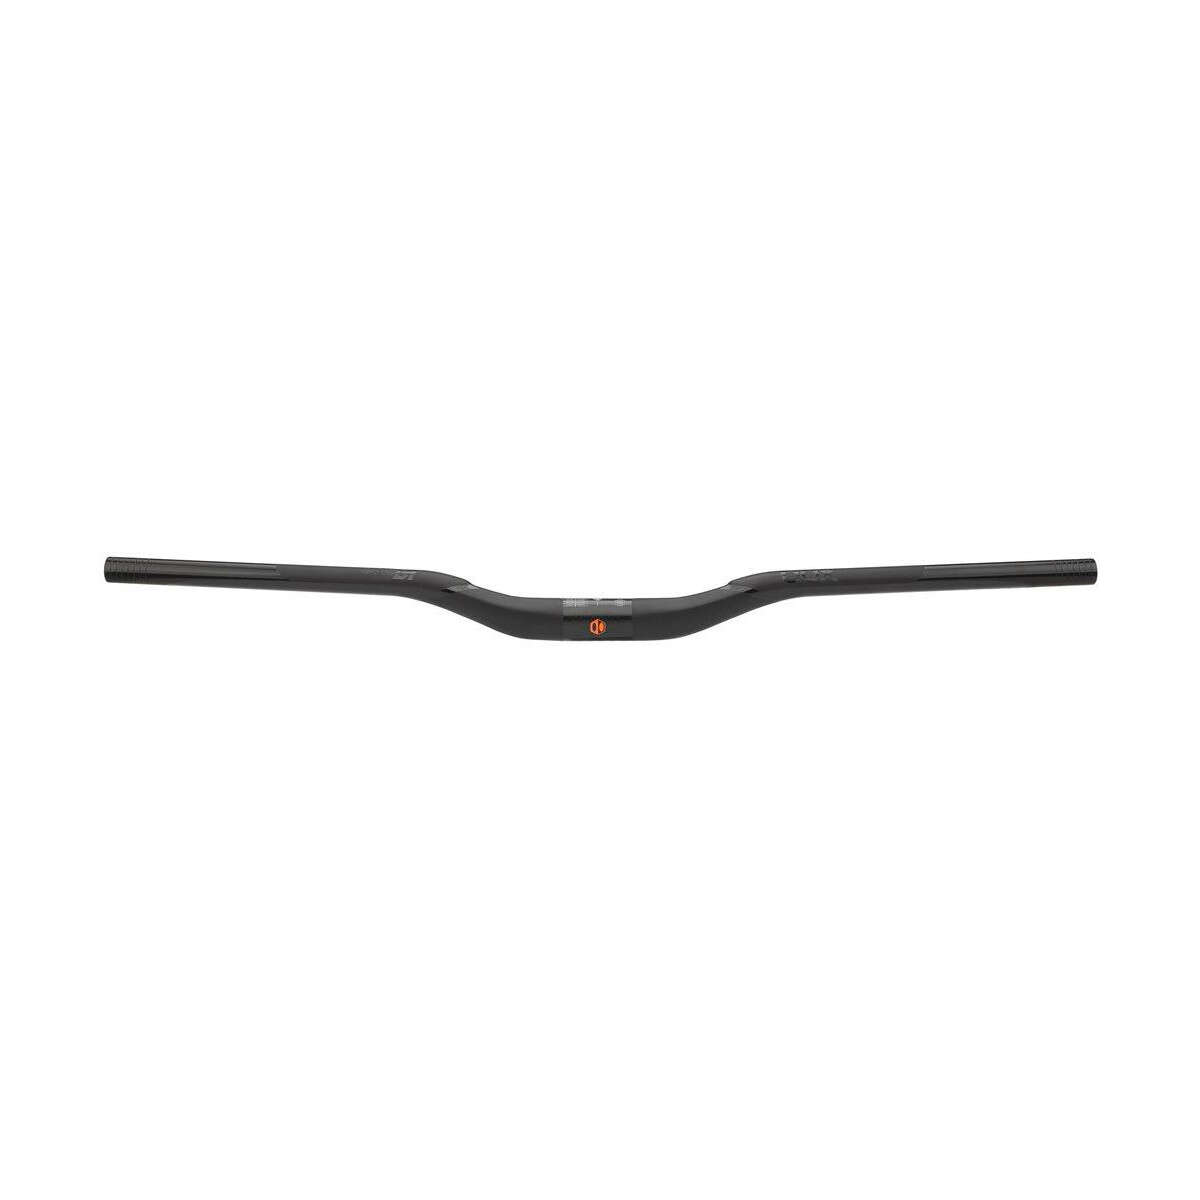 Box Components Guidon VTT One Carbon DH Black, 30 mm rise, 35 mm clamp